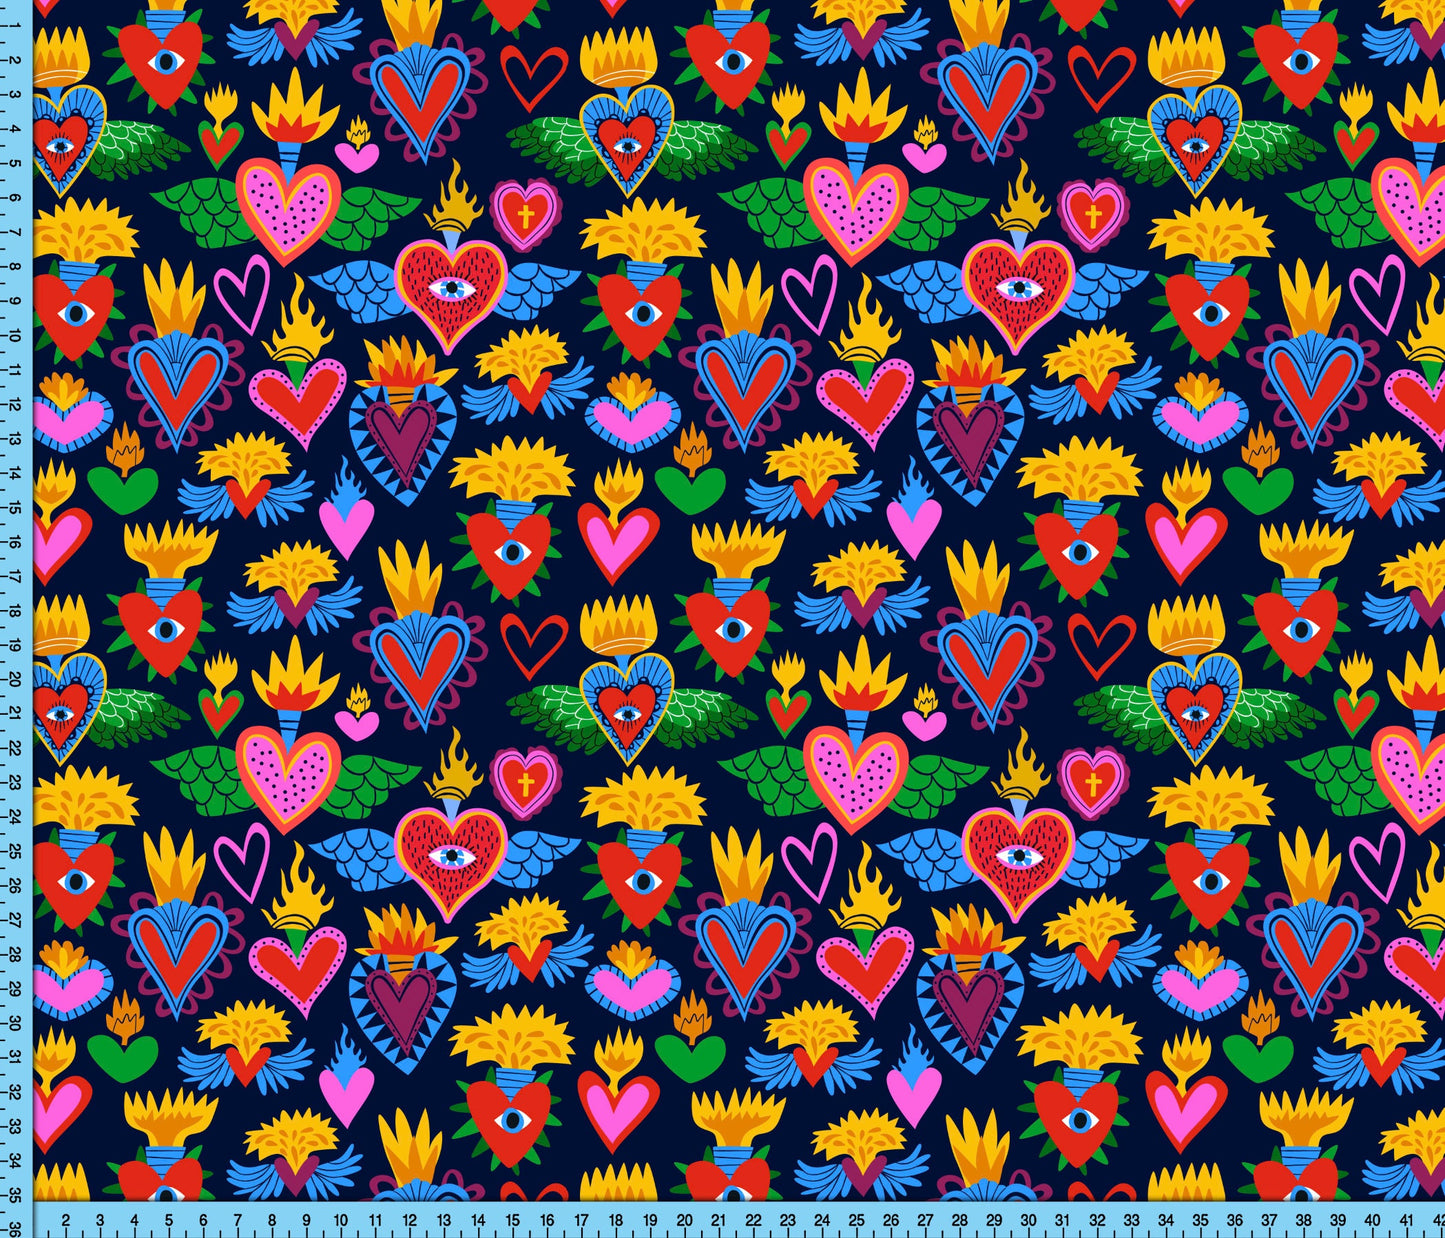 Sacred Heart Fabric Pattern Printed By the Yard, Flaming Heart Design, Day of the Dead Craft Fabric Pattern